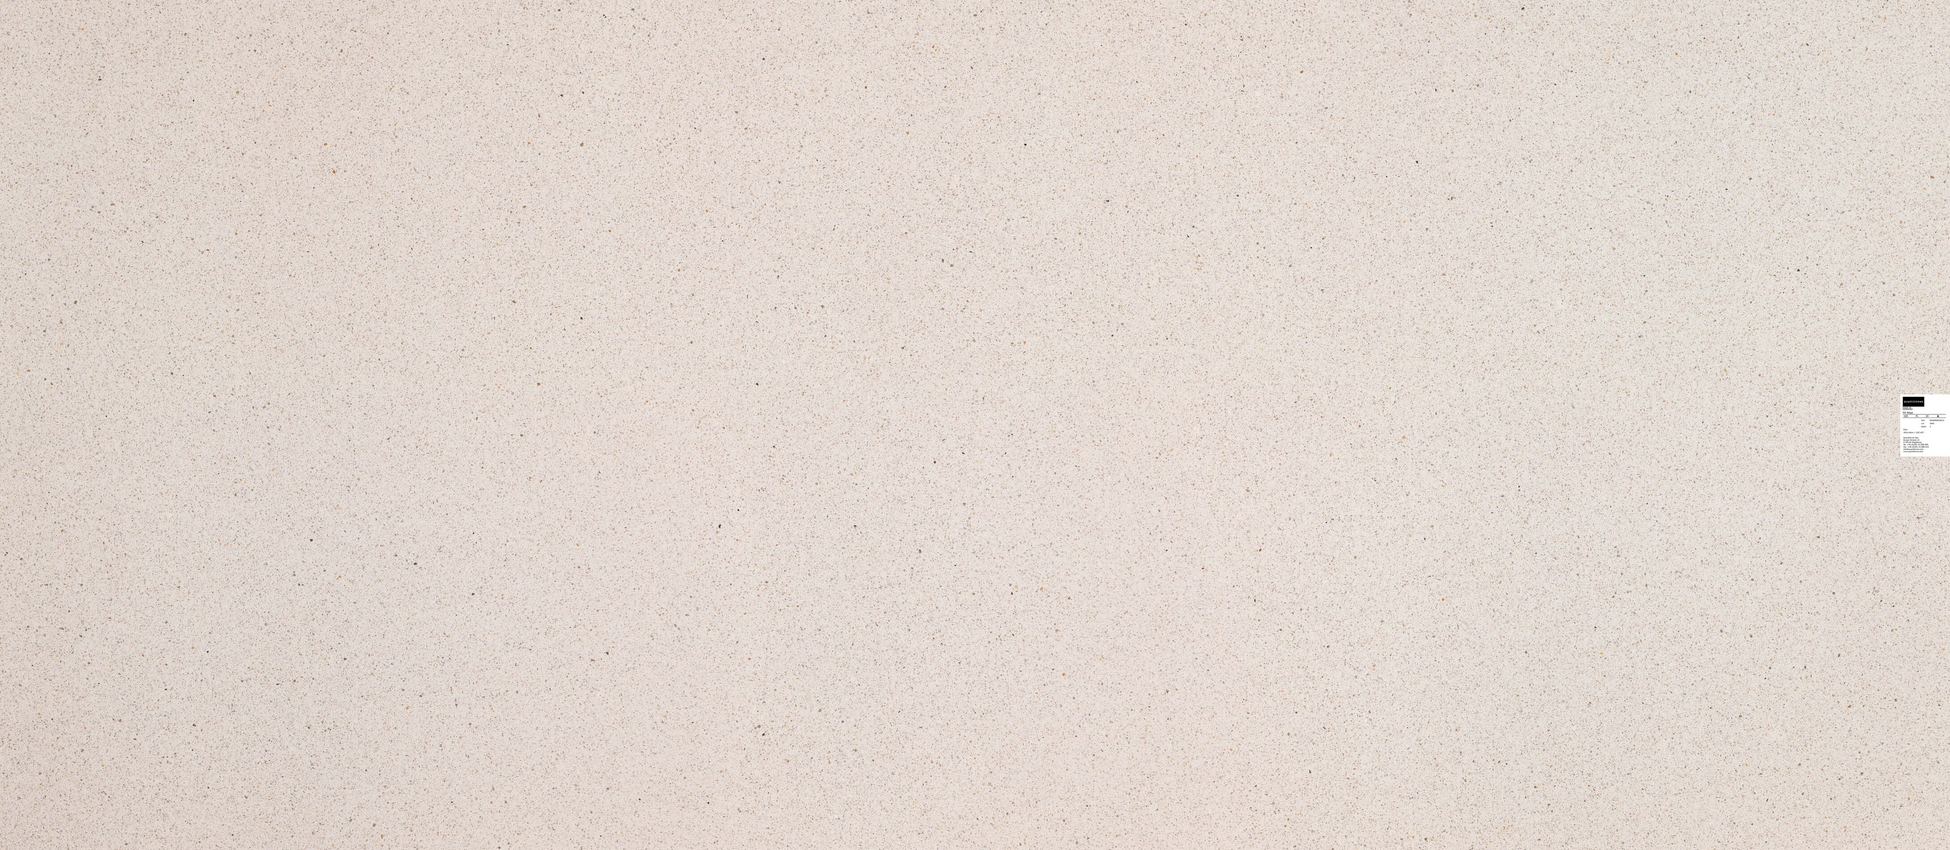 Beige 100: quartz agglomerate for tops, countertops and surfaces